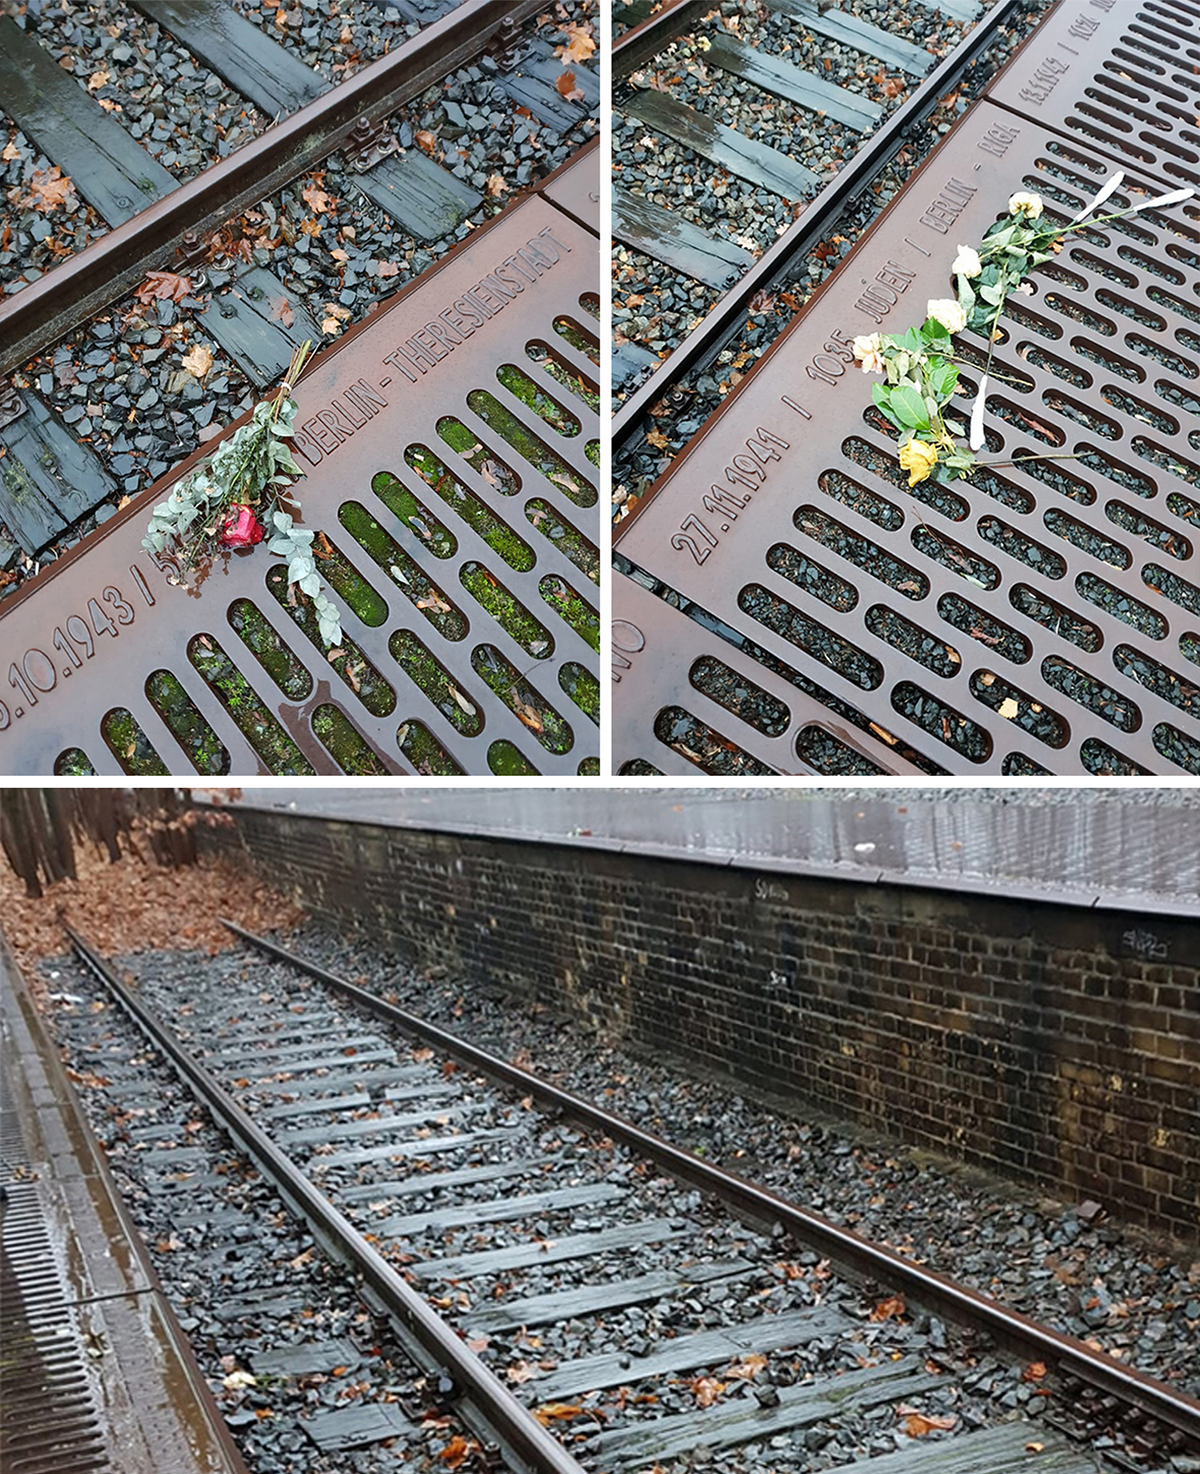 The Track 17 Deportation Memorial consists of the platform and railway track that was used for the deportation. Each sleeper is inscribed with details about the various trains that left from there: the date, the number of people deported and its destination to the various ghettos and camps.<br><br> Photos: Ronel Koekemoer